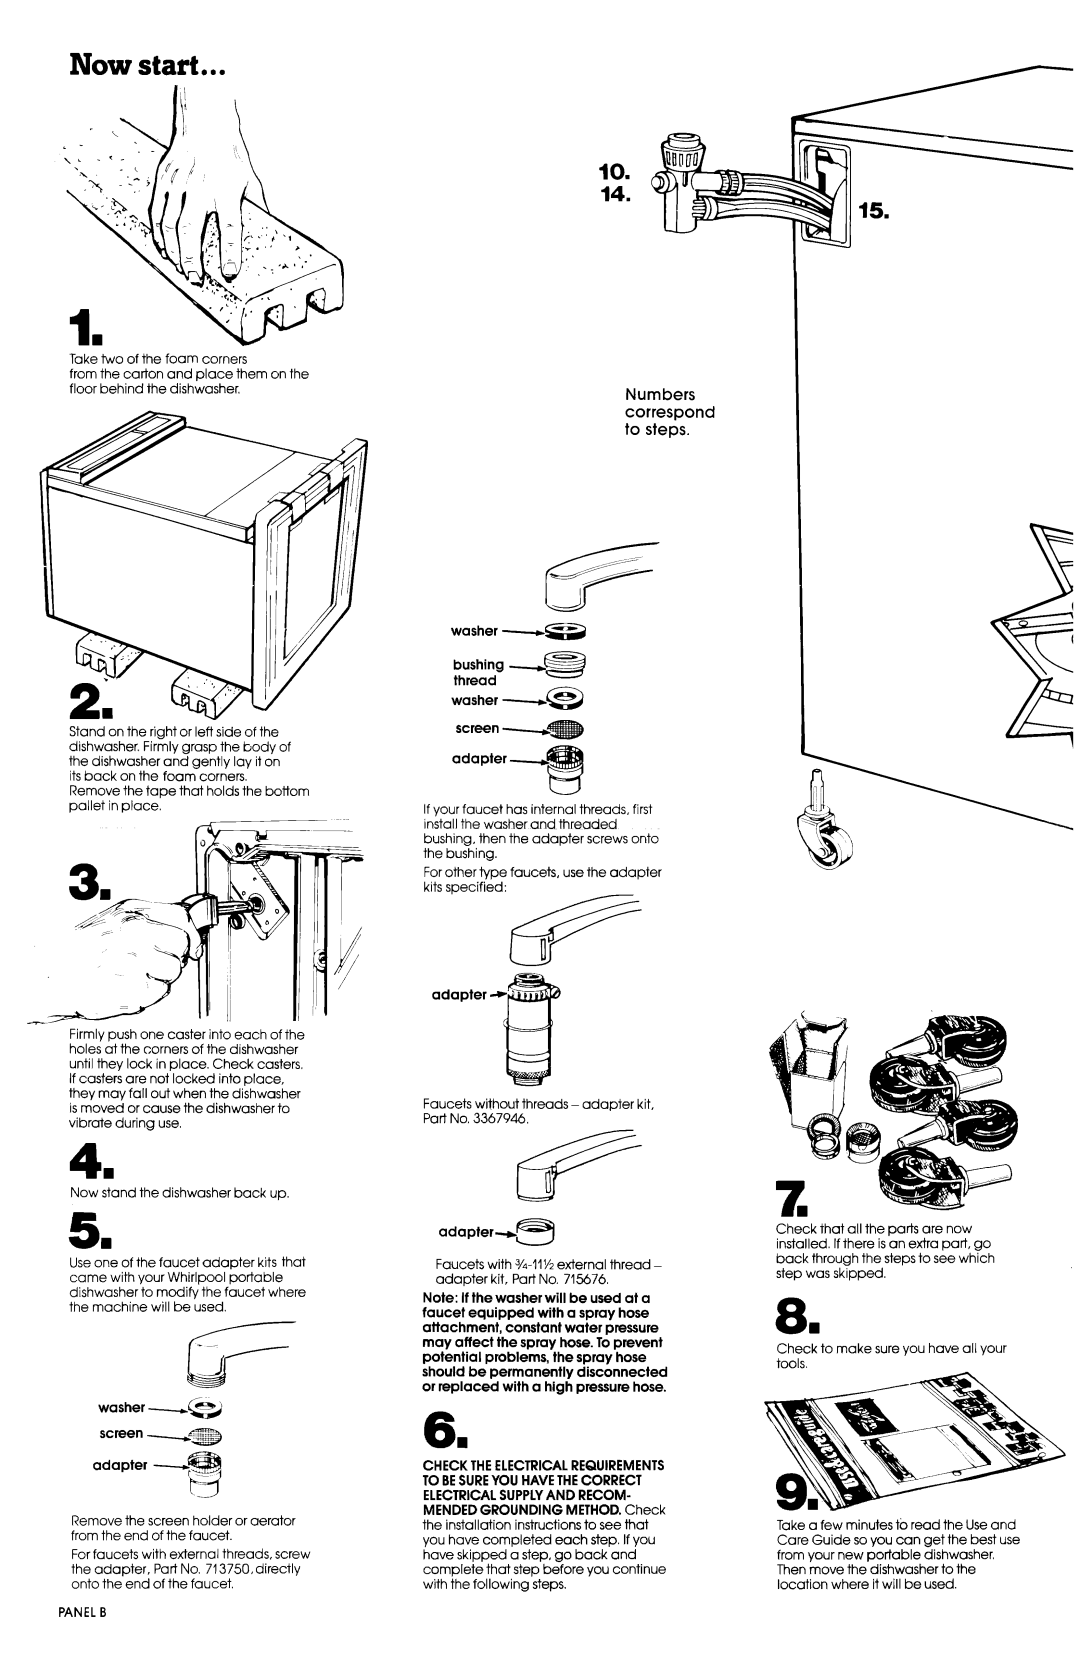 Whirlpool I-43 manual Now start, Numbers correspond to steps washer -sa, washer - es screen adapter, adapter + 